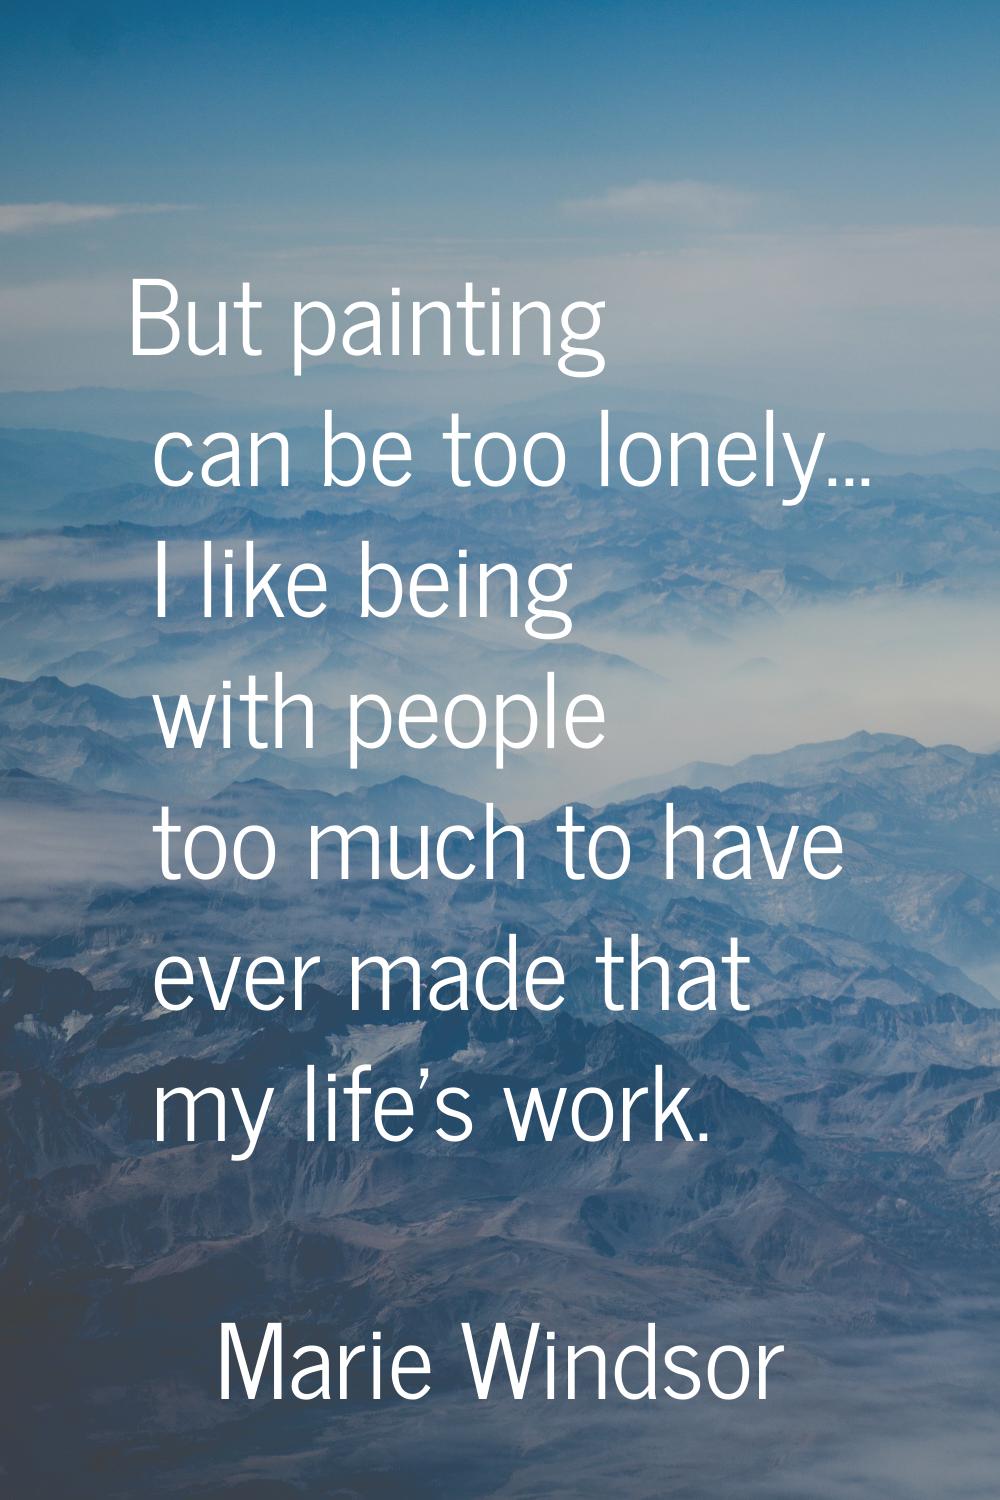 But painting can be too lonely... I like being with people too much to have ever made that my life'